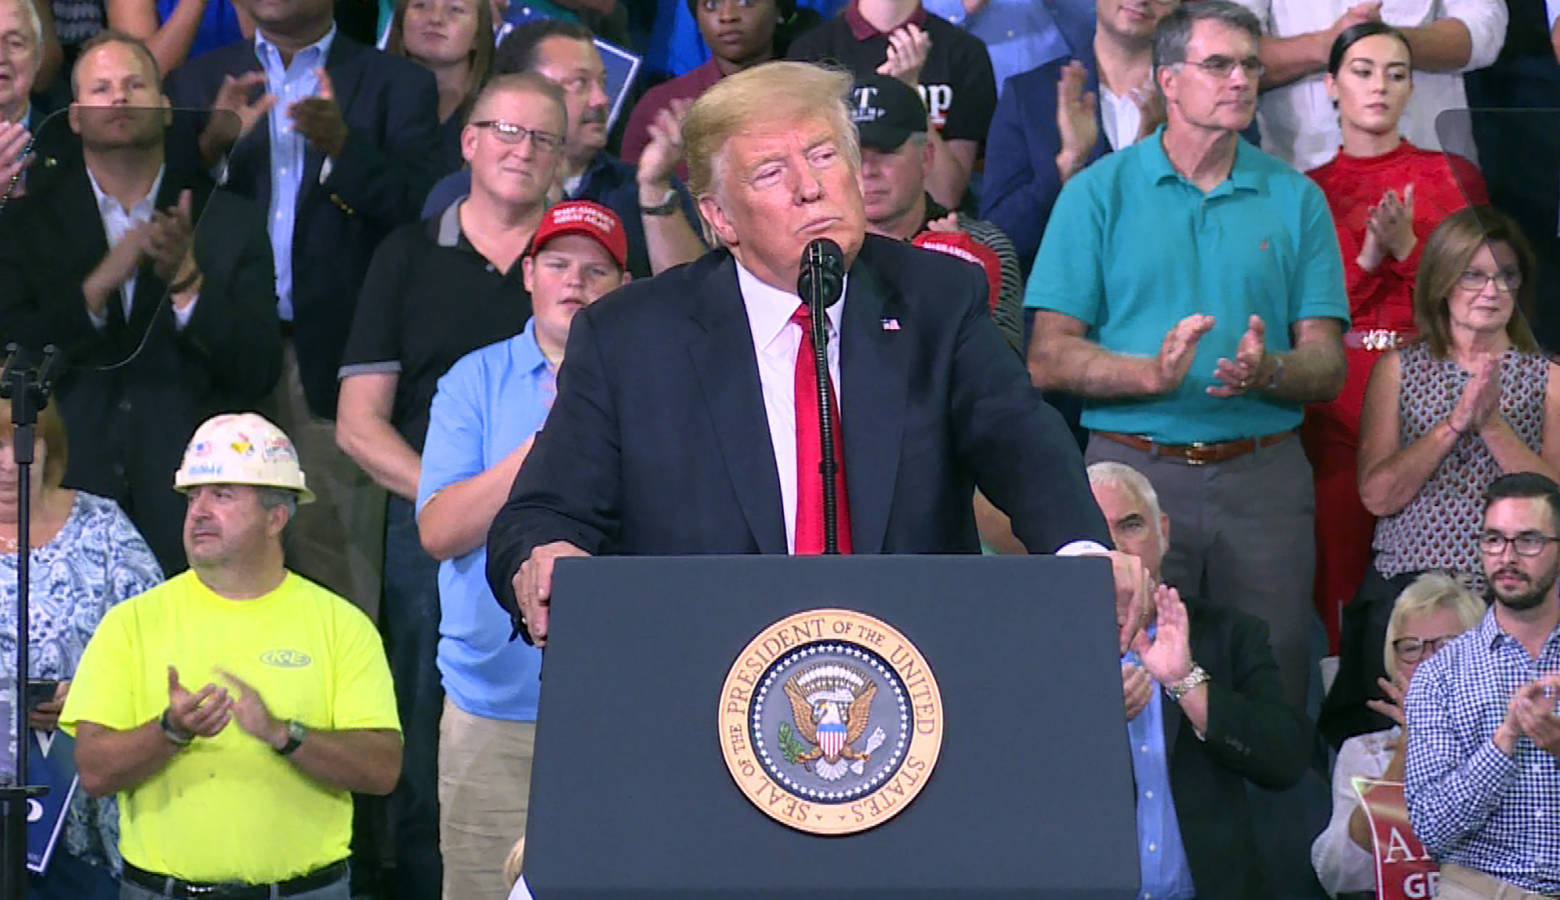 President Donald Trump speaks to the crowd in Evansville where he endorsed Republican Senate candidate Mike Braun. (Alex Eady/WTIU)